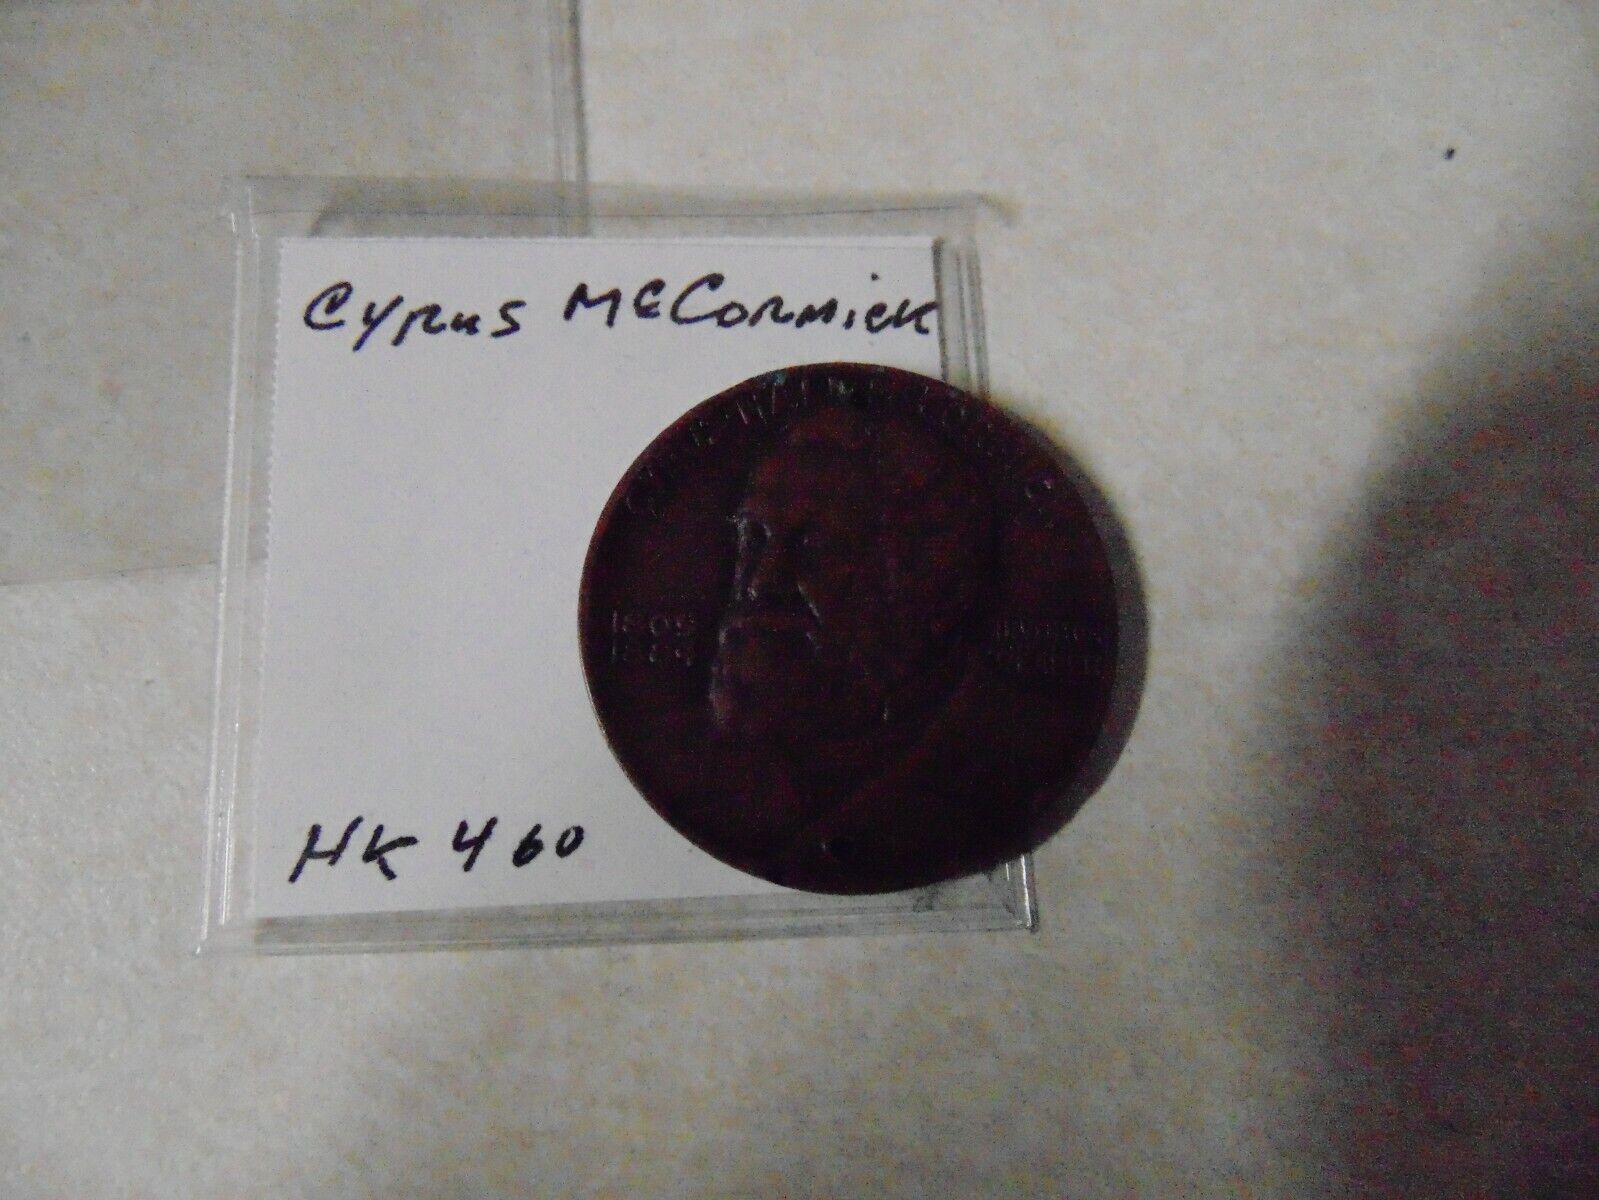 COIN TOKEN CYRUS HALL McCORMICK 1809-1884 INVENTOR OF THE REAPER INTERNATIONAL 2